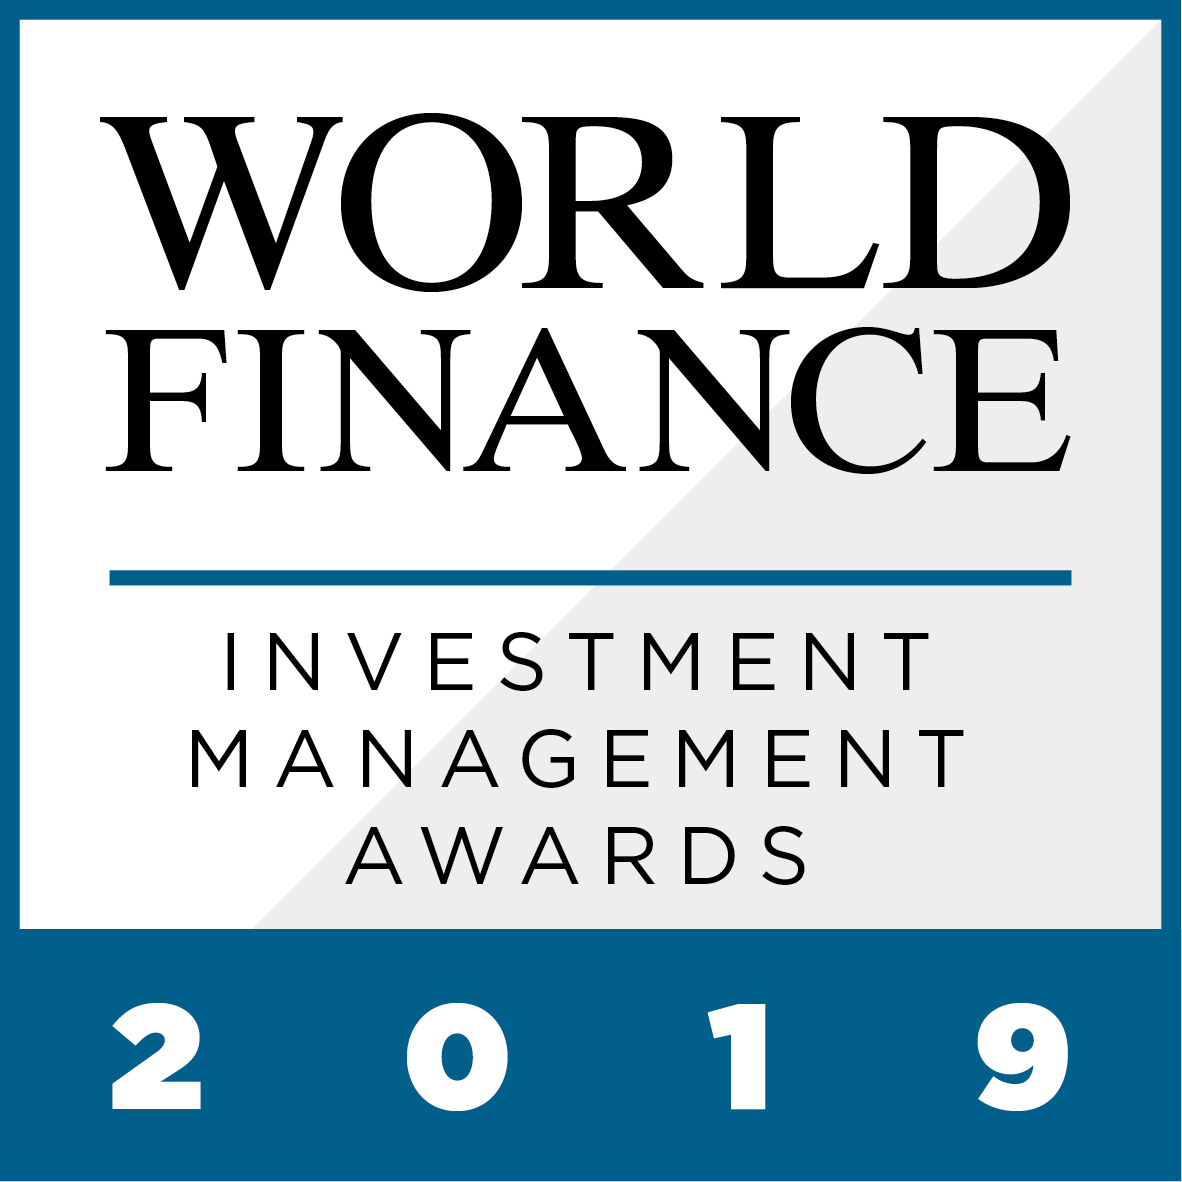 The World Finance Investment Management Awards 2019 celebrate the firms that have continued to show strength, resilience and innovation amid market turbulence and complex regulatory reforms